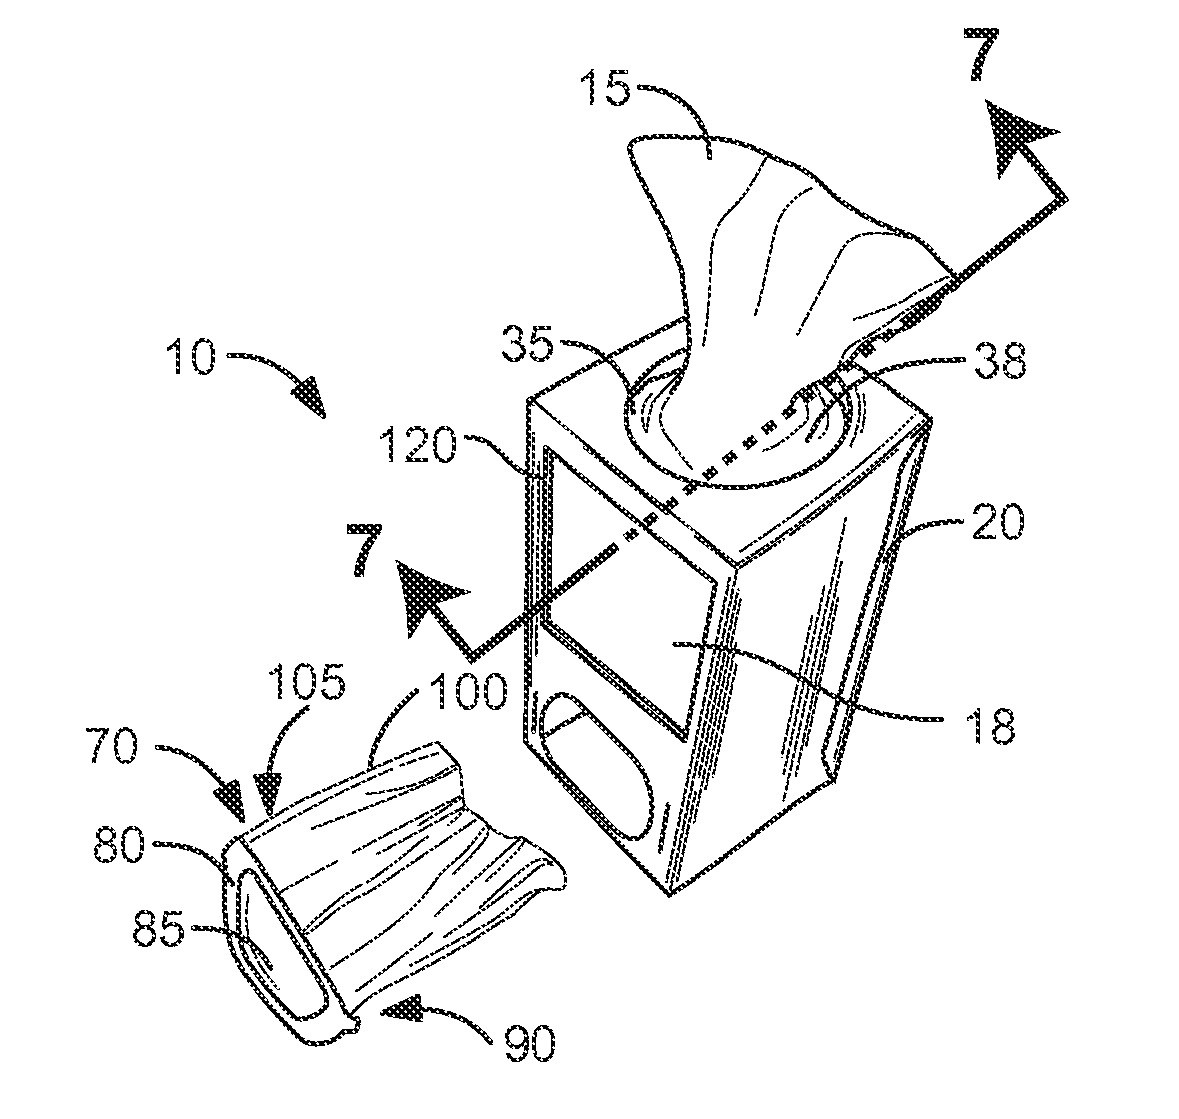 Combination tissue dispenser and trash receptacle